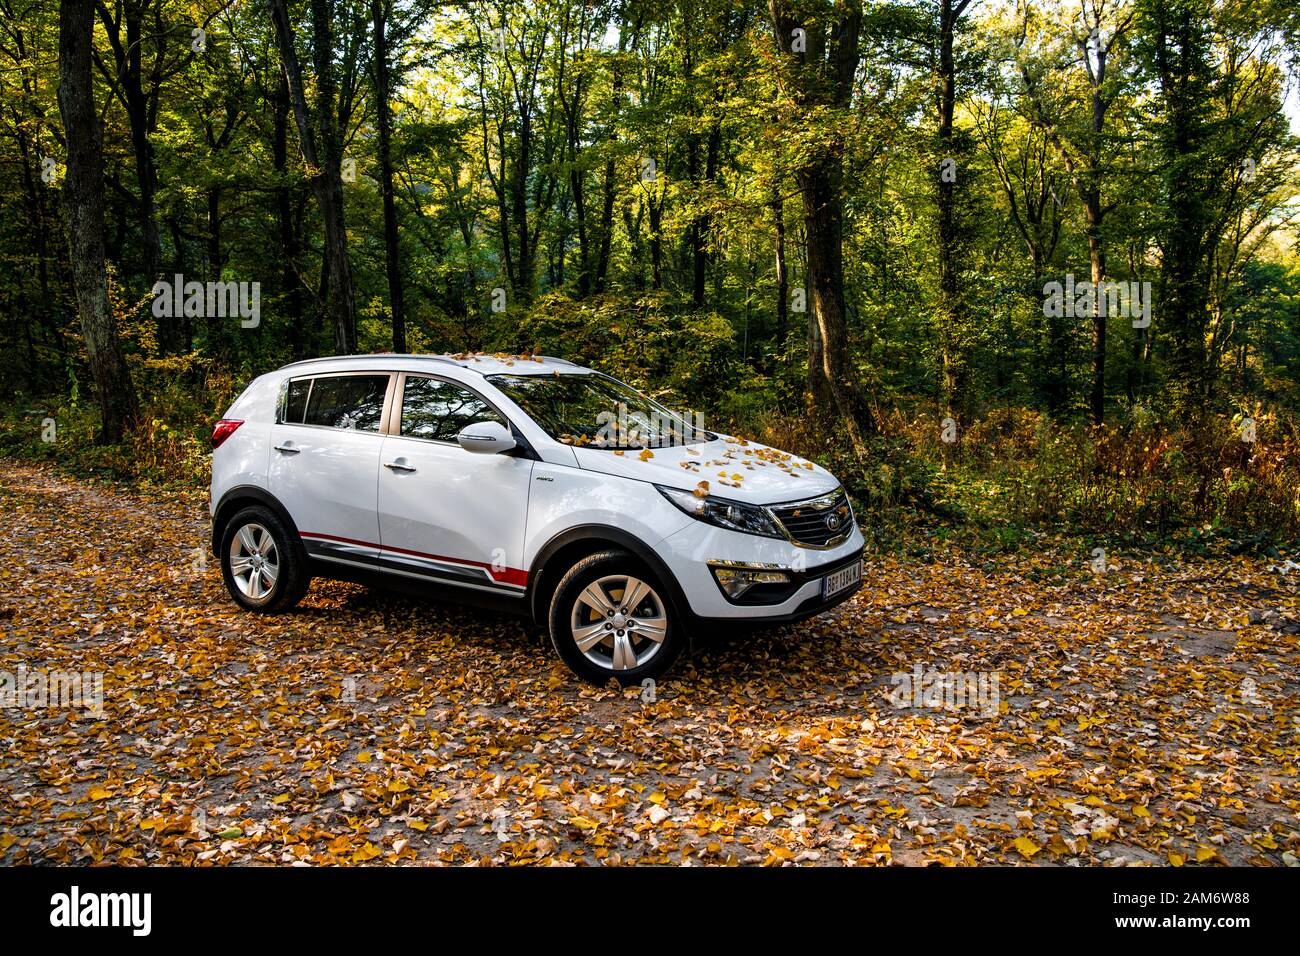 SUV car Kia Sportage 2.0 CRDI awd or 4x4, on the forest road, coverd with  dried leaves, beautiful car landscape, with dominant autumn colors. Stock Photo